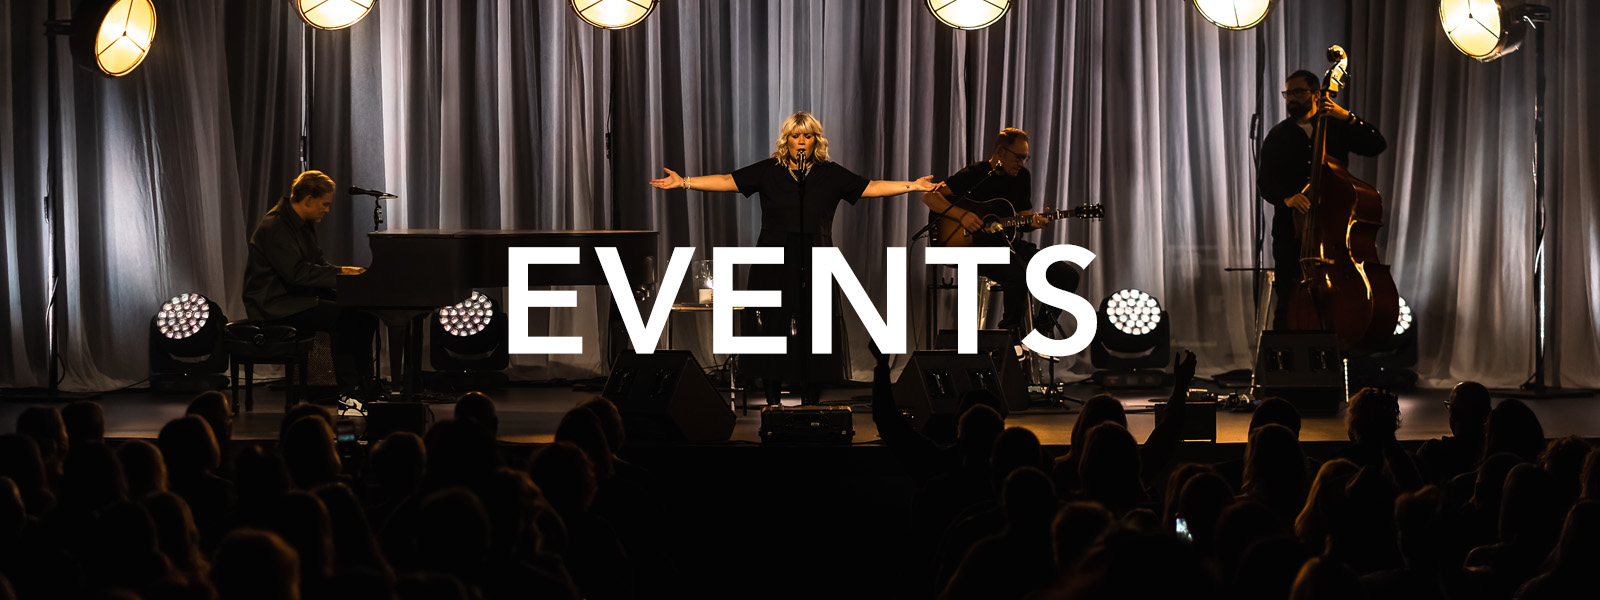 Events at Connection Point Church in Jackson, Missouri